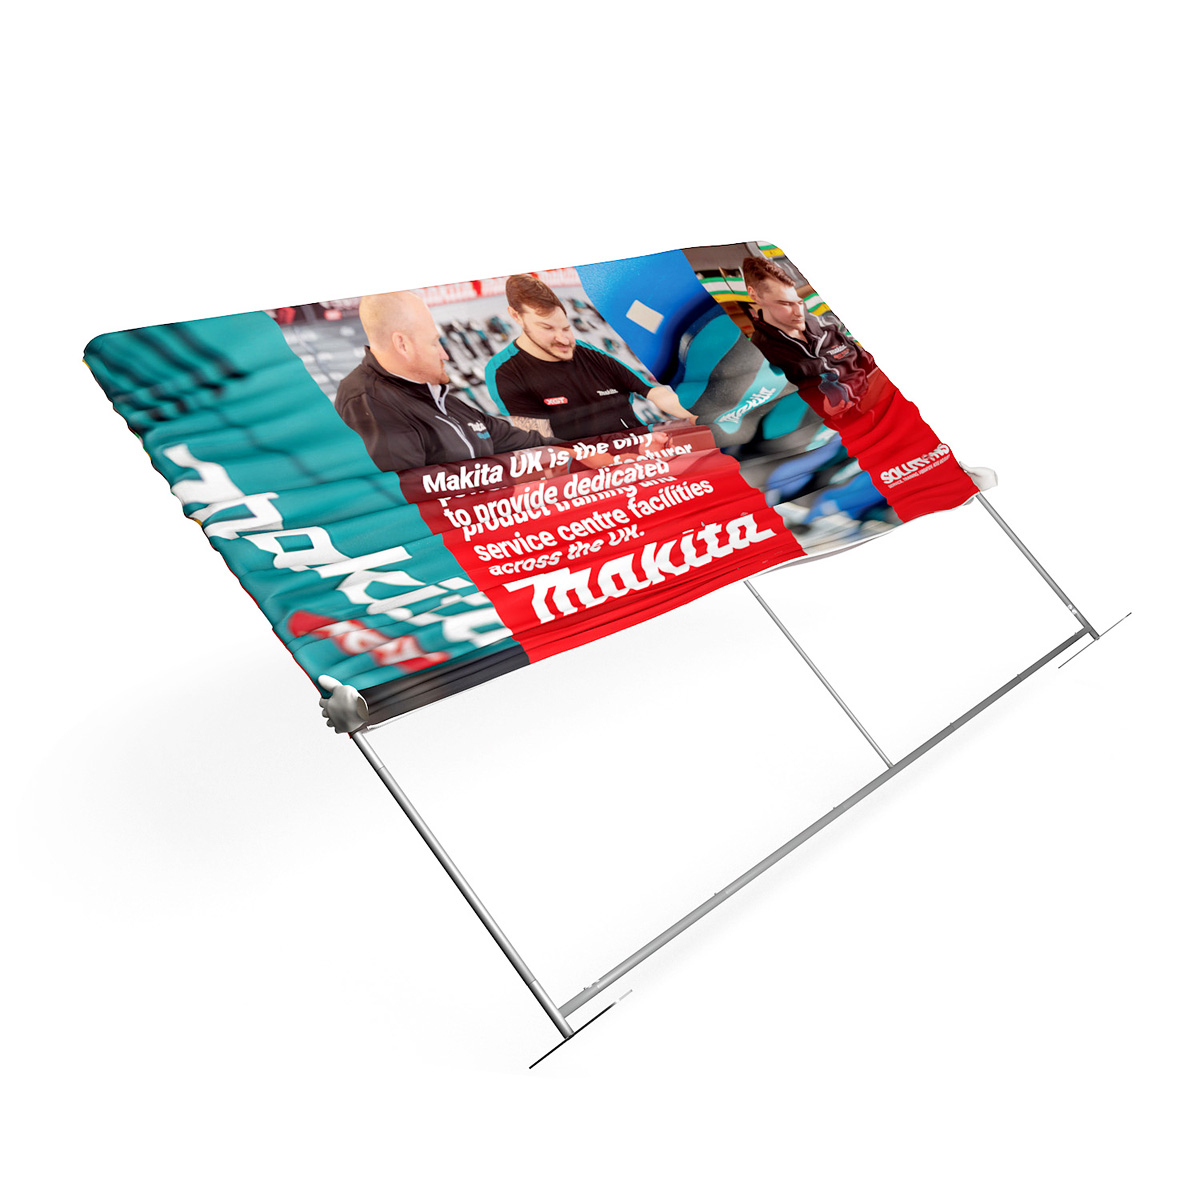 FABRIWALL® Stretch Fabric Exhibition Stand Replacement Graphics Slide Over Existing Hardware 